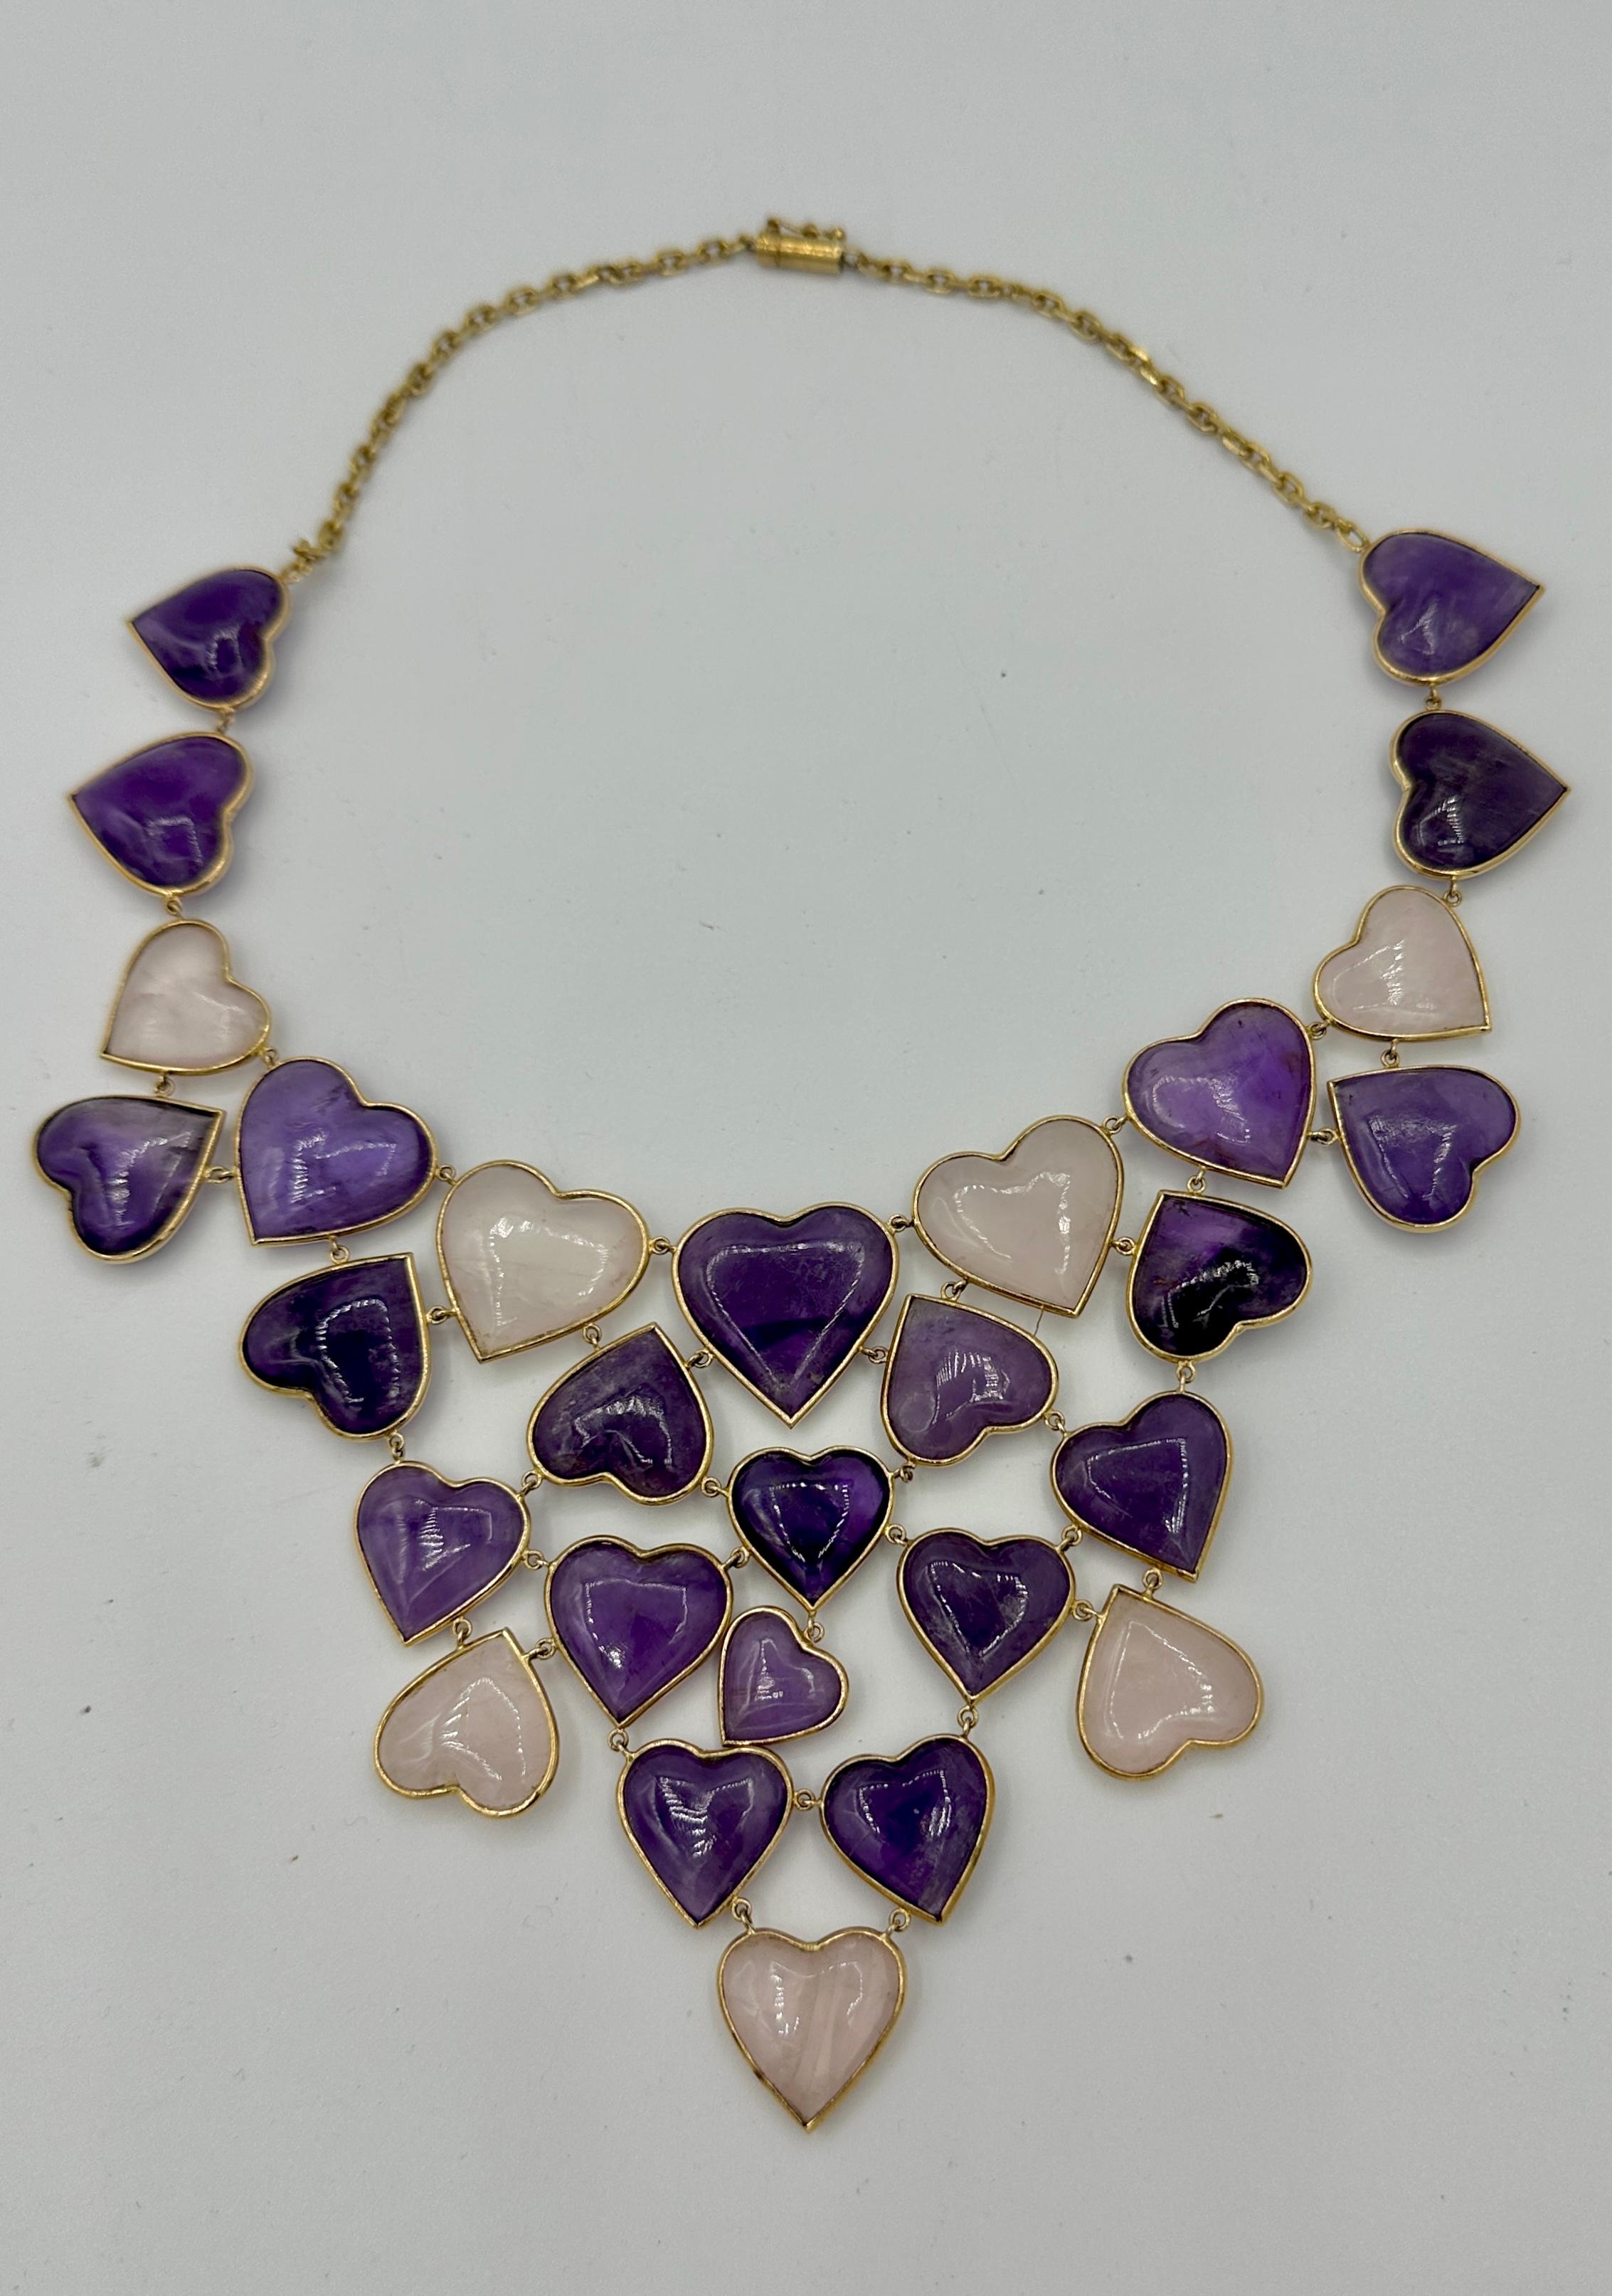 Amethyst Rose Quartz Heart Necklace and Earrings 14 Karat Gold Ms. Daves Estate For Sale 3